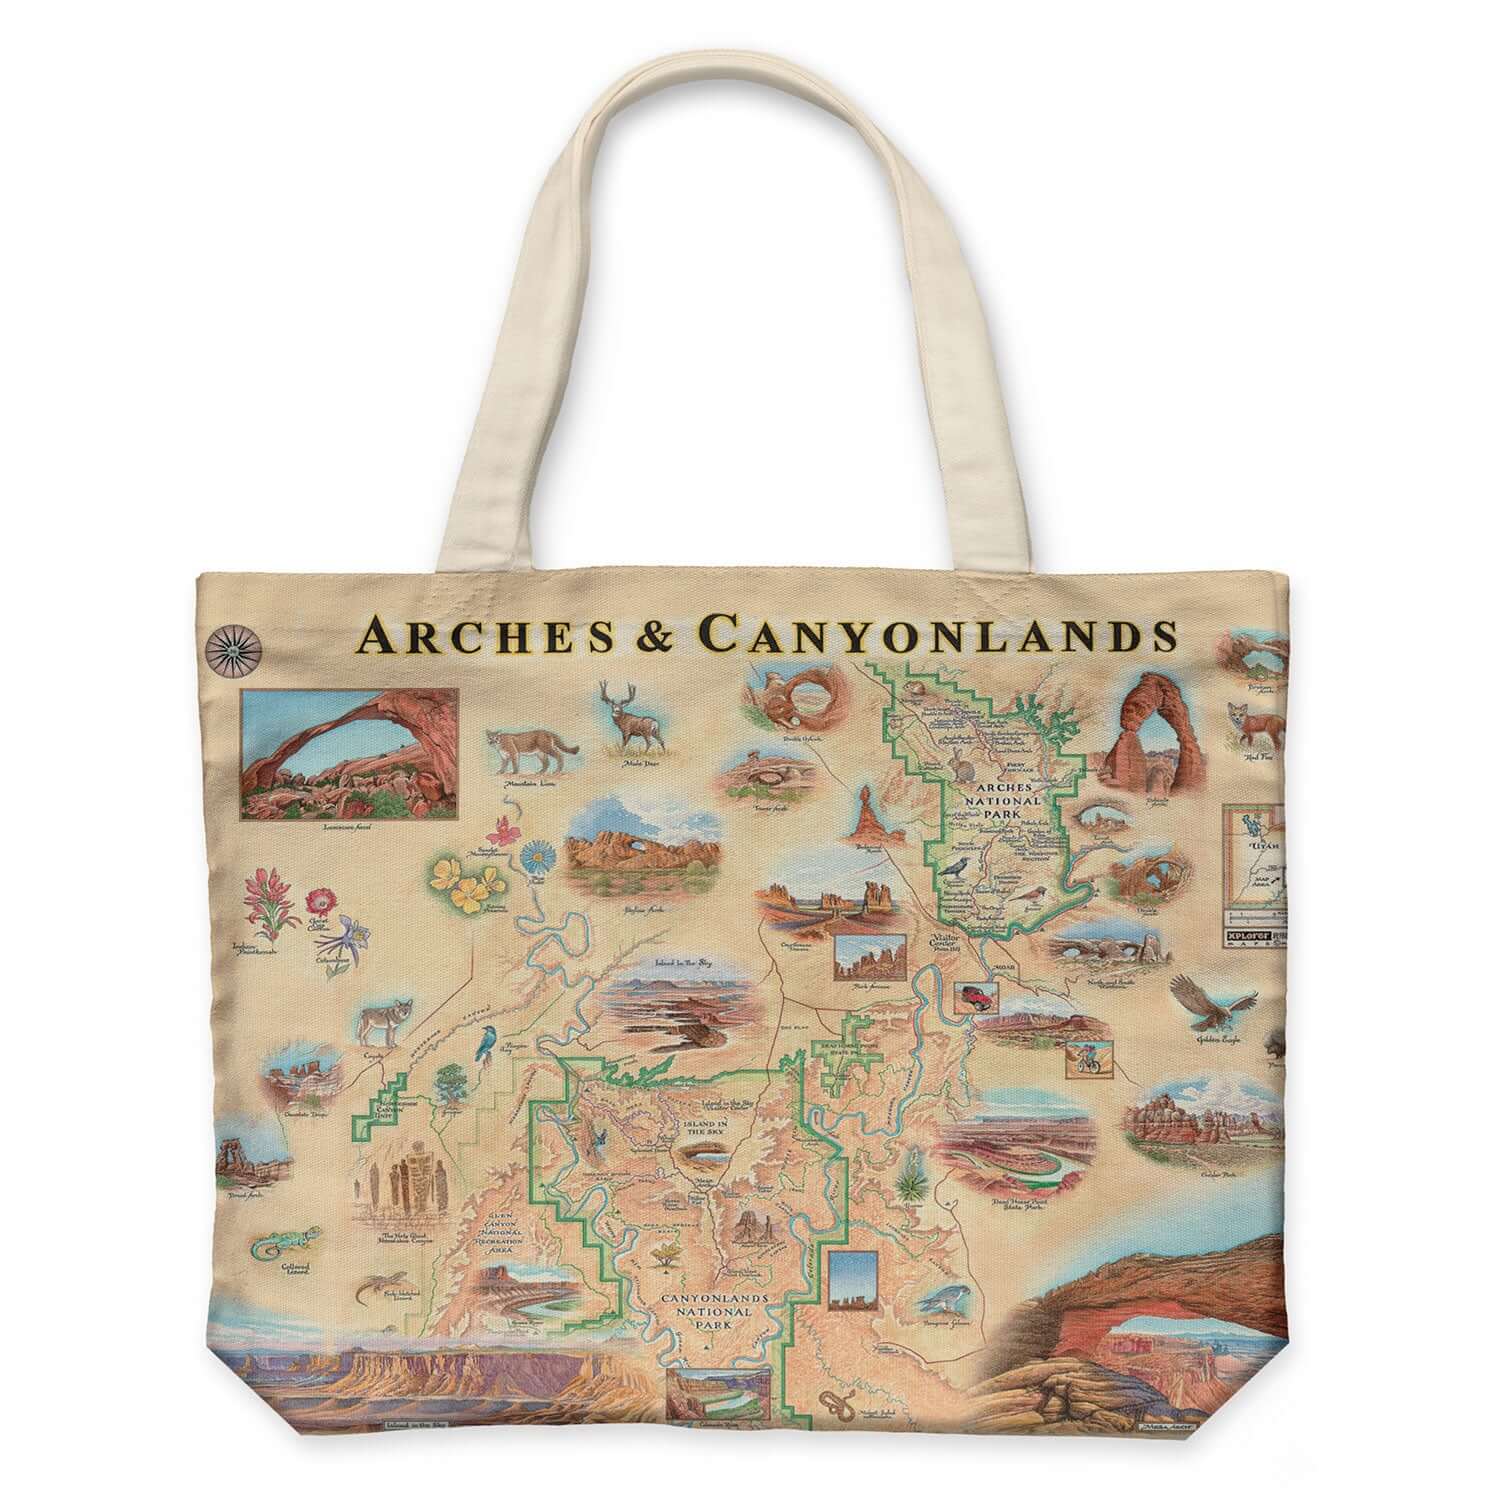 Arches & Canyonlands National Park canvas tote bag in earth-tone colors. Featuring Moab, Colorado River, Mesa Arch, Landscape Arch, and canyons. Flora and Fuana include native flowers like Indian Paintbrush, columbine deer, elk, mountain lion, wolf, lizard, birds, and eagle. 